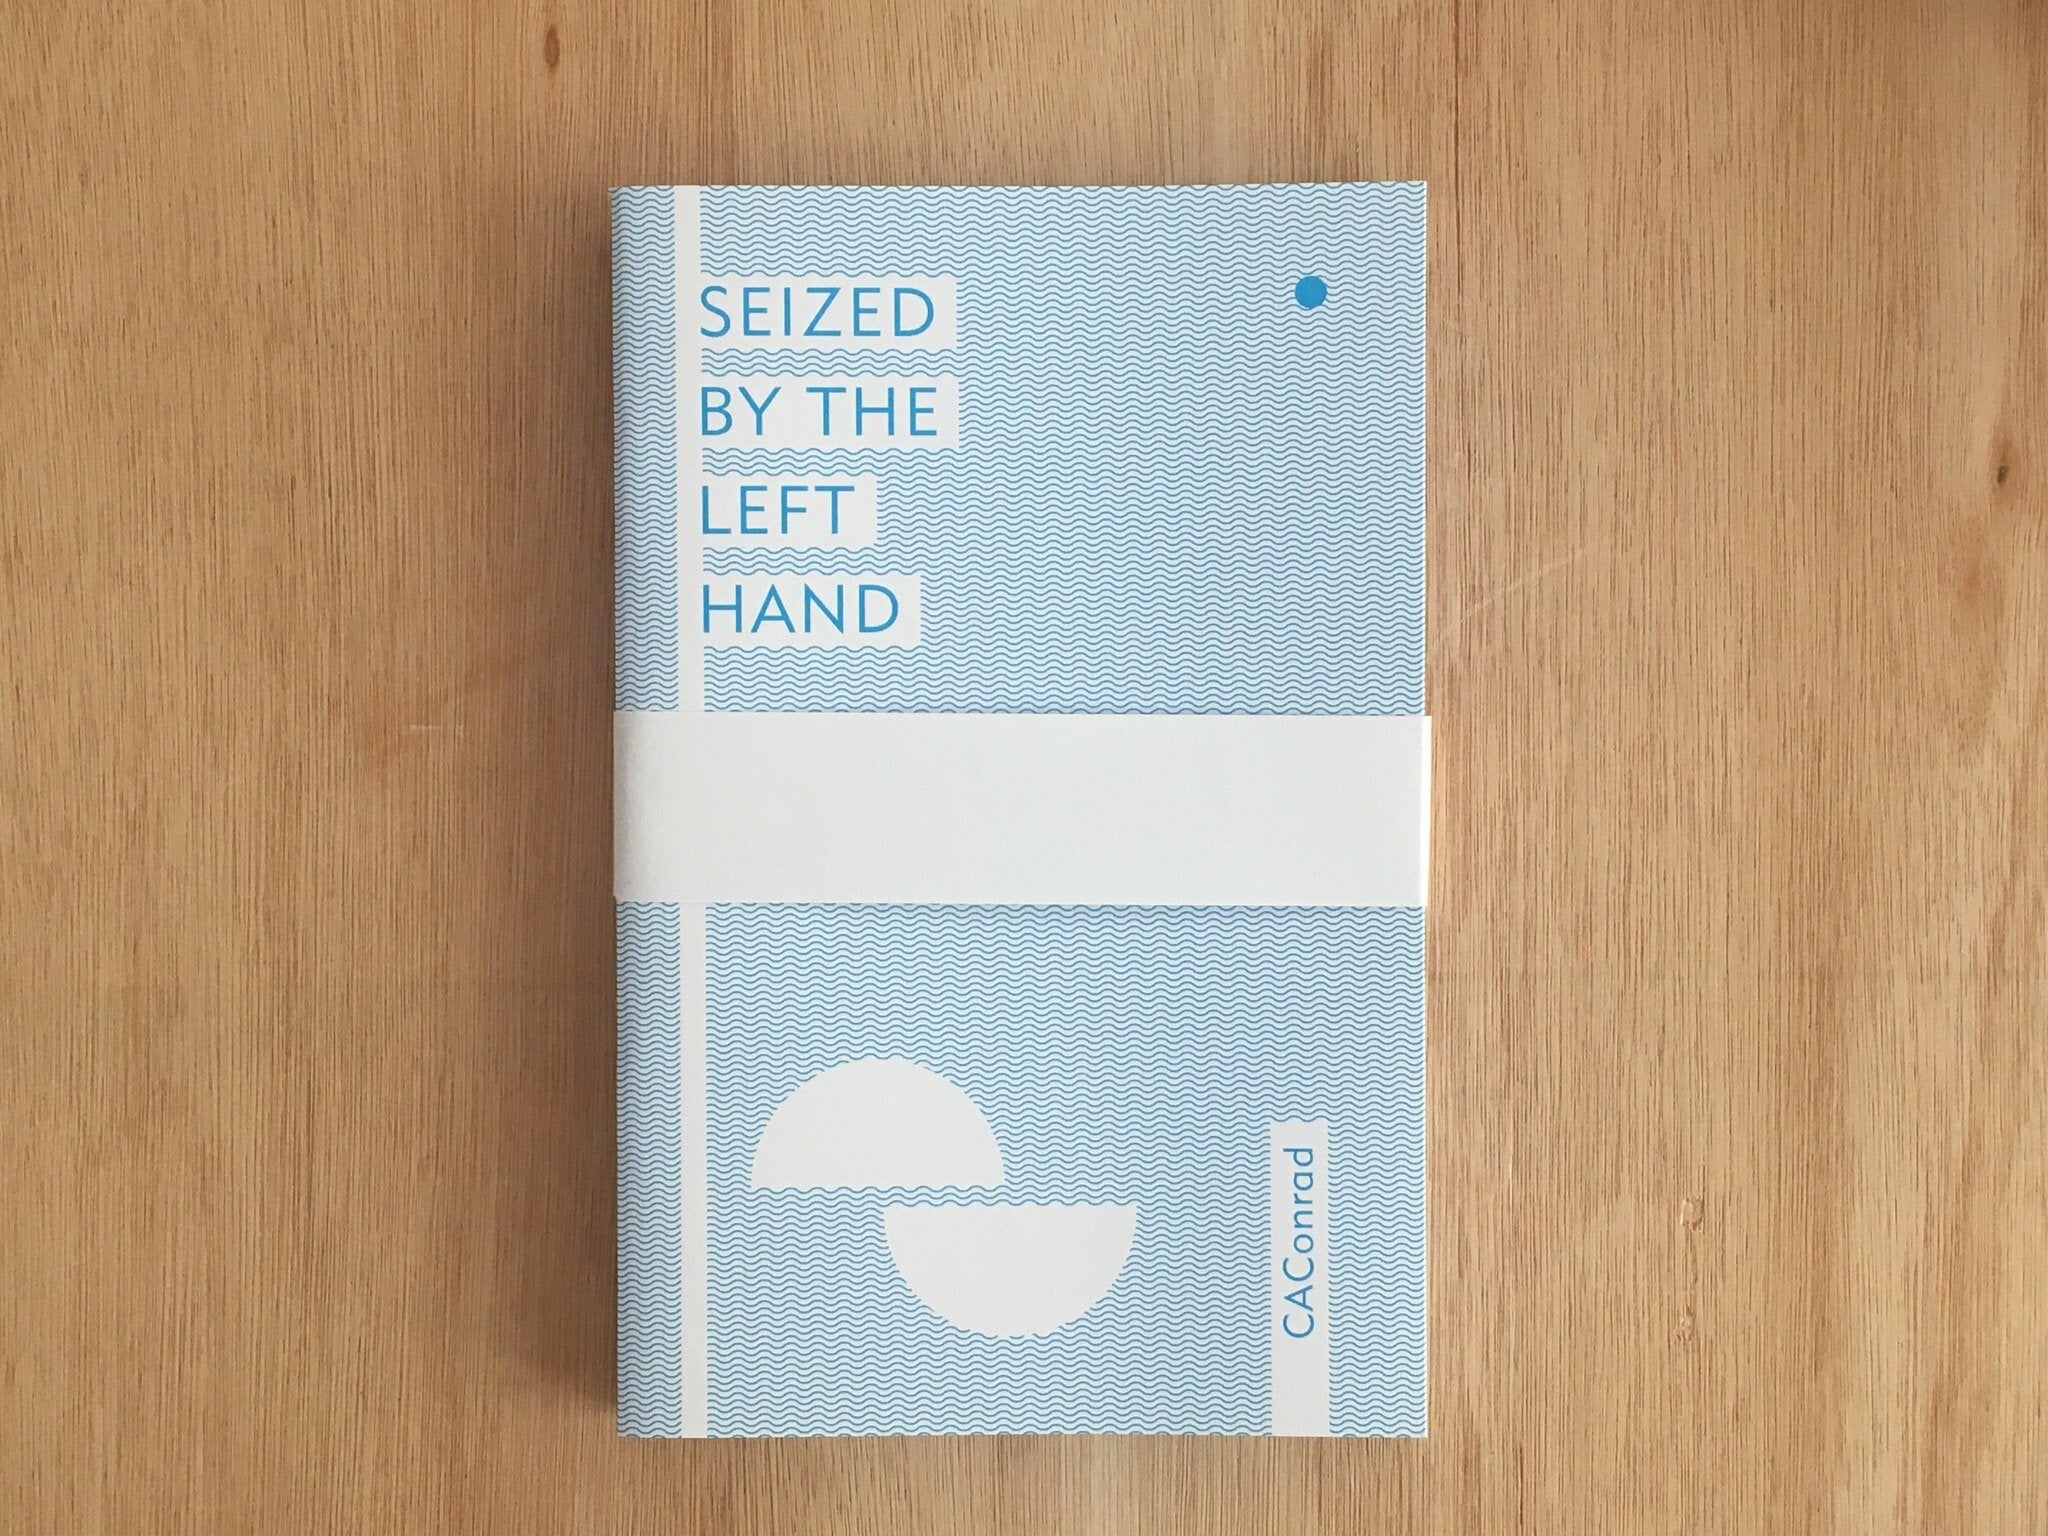 SEIZED BY THE LEFT HAND by CAConrad, Huw Lemmey and Tuesday Smillie